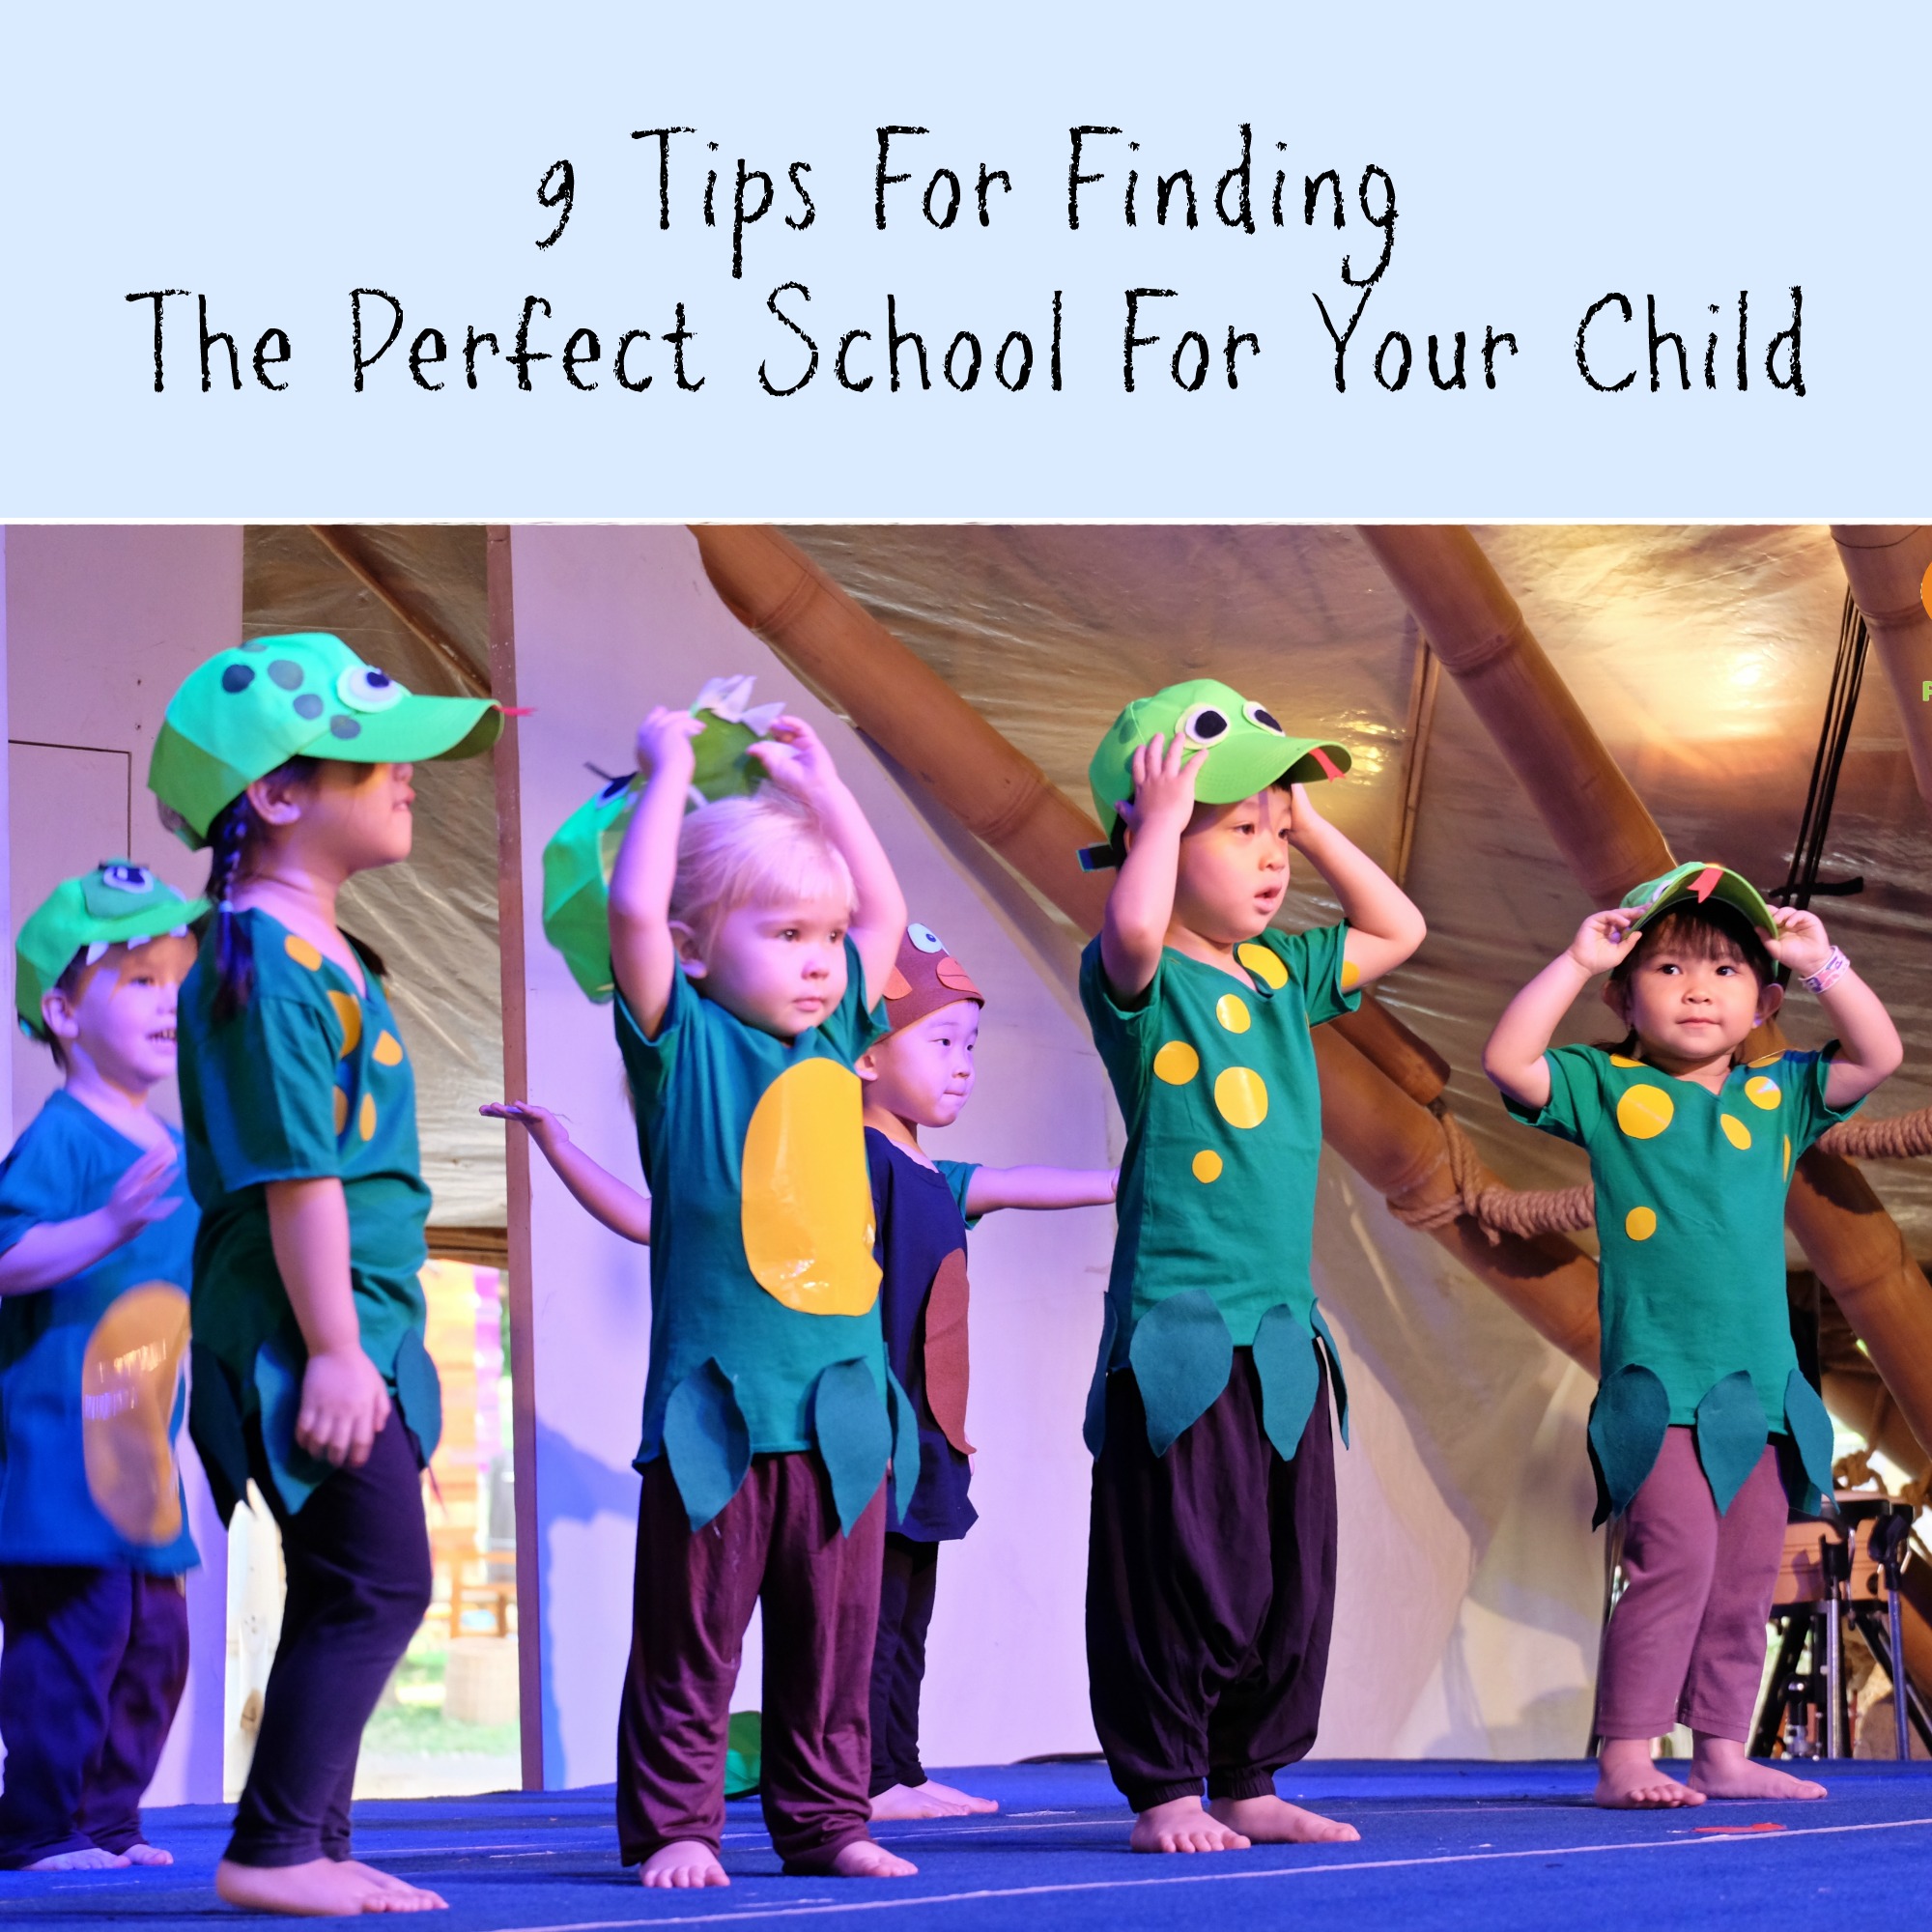 9 Tips For Finding The Perfect School For Your Child